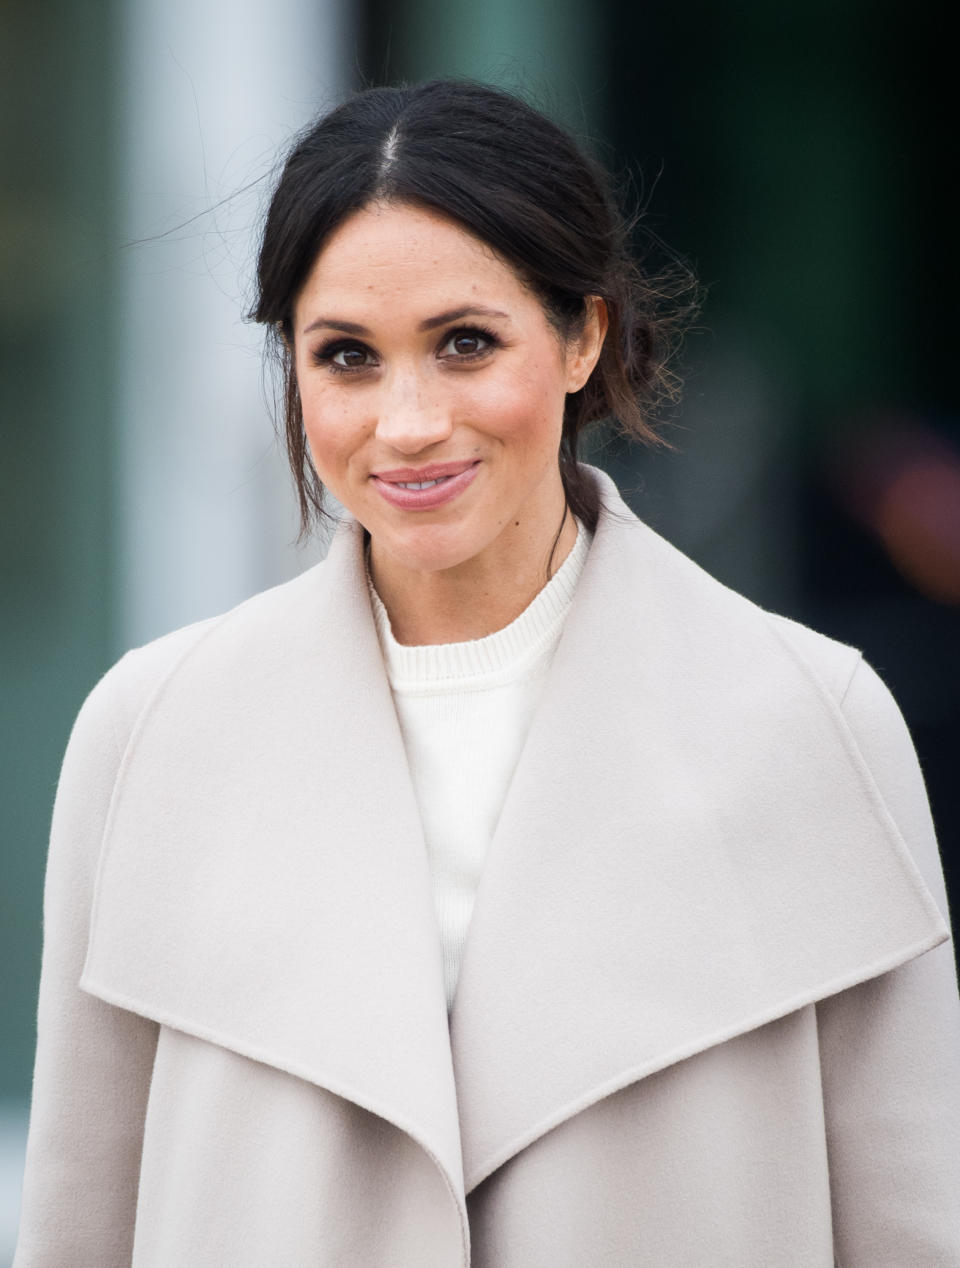 In just two days time Meghan Markle will walk down the aisle at Windsor Castle. Photo: Getty Images